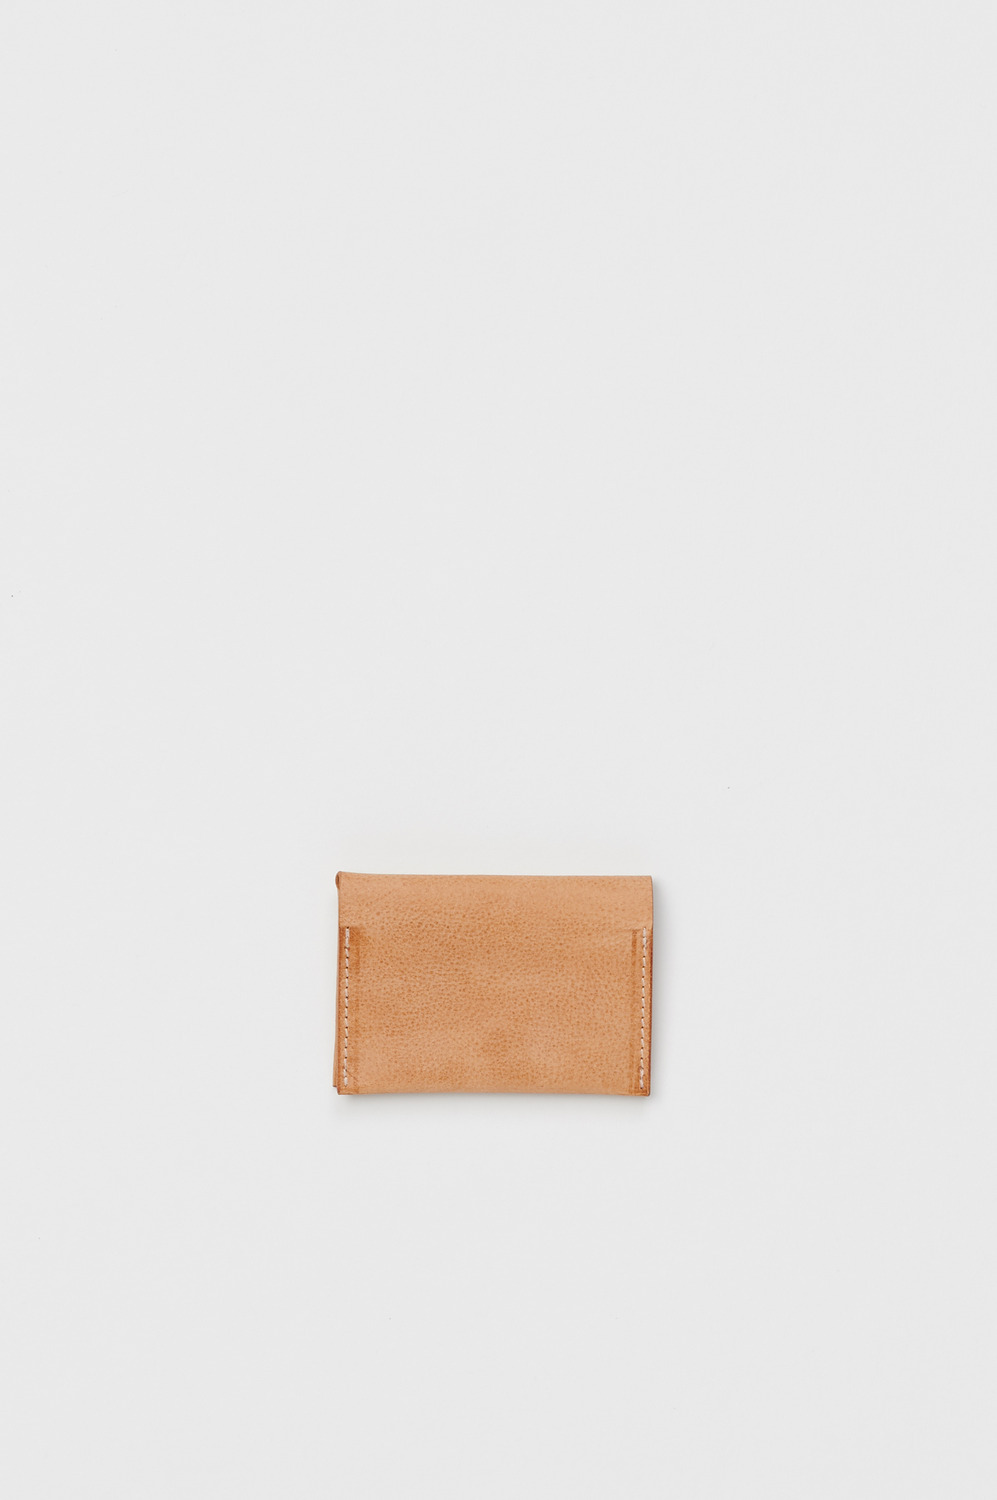 compact card case 詳細画像 natural 1